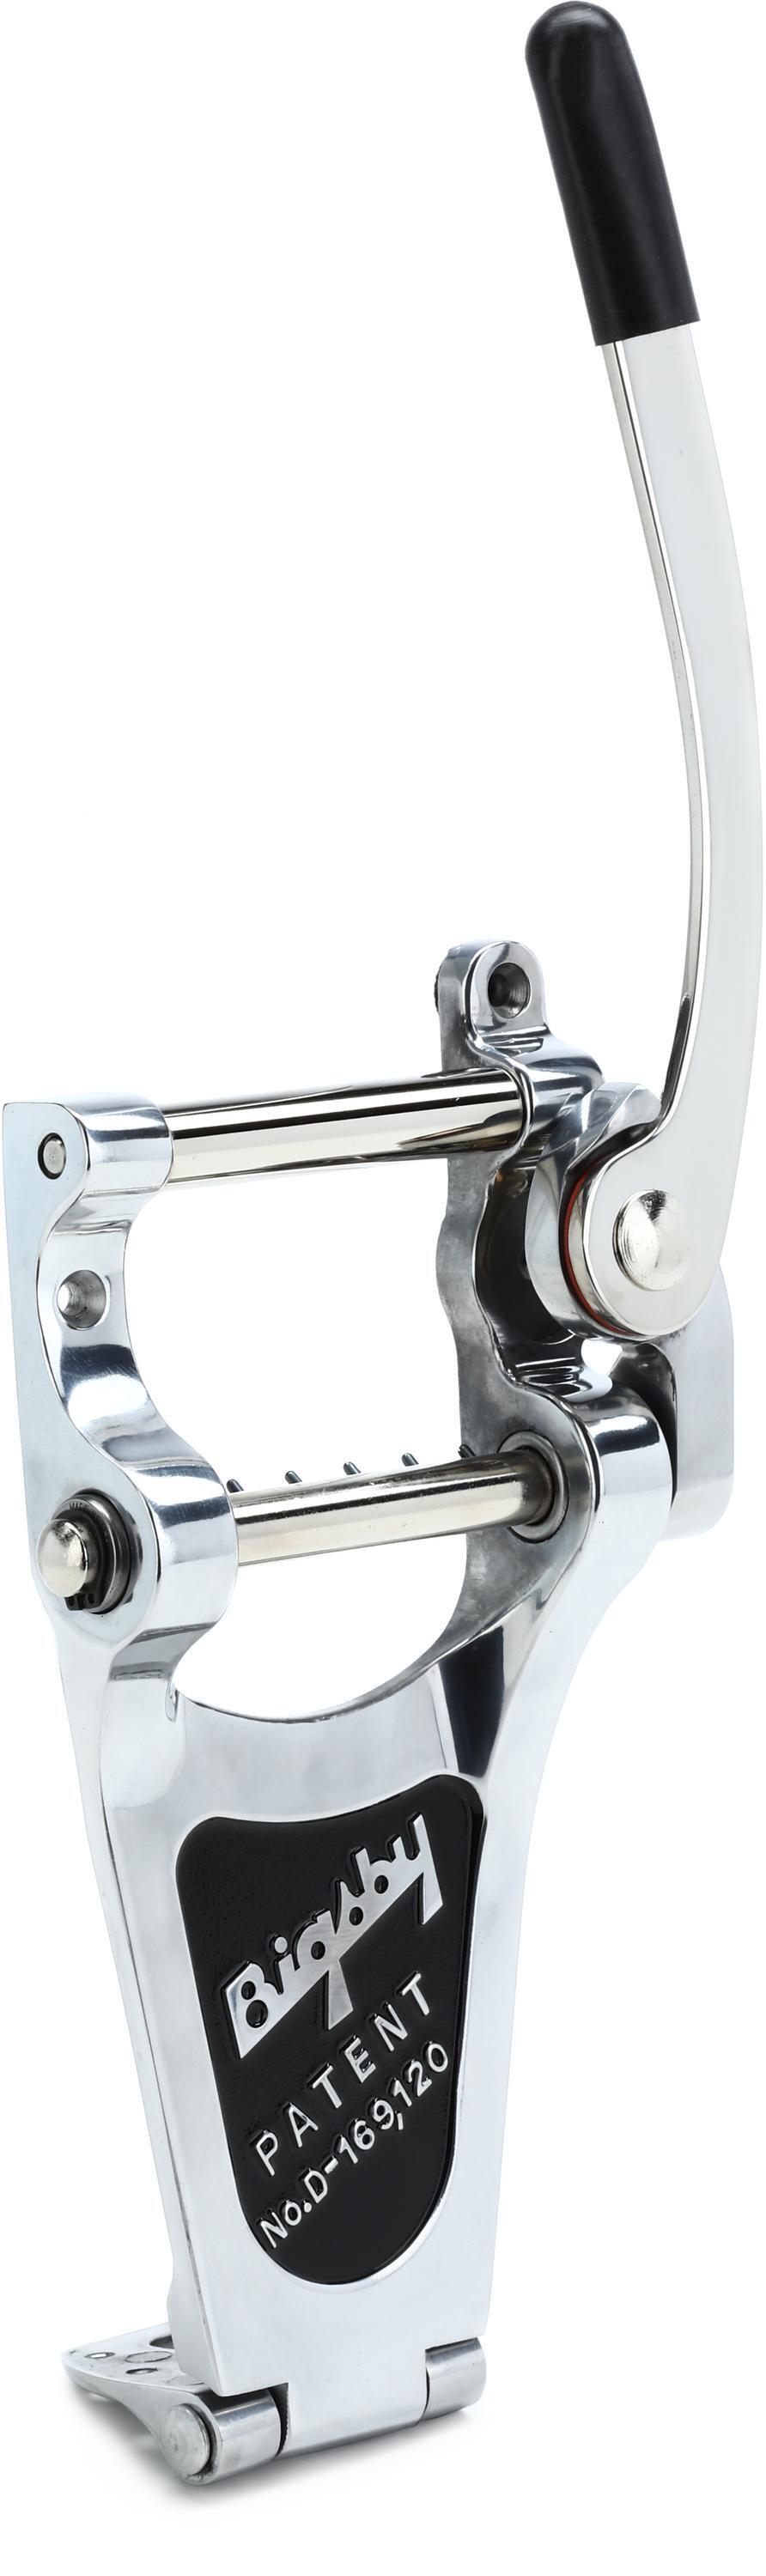 Bigsby B7 Vibrato Tailpiece for Archtop Guitars - Aluminum